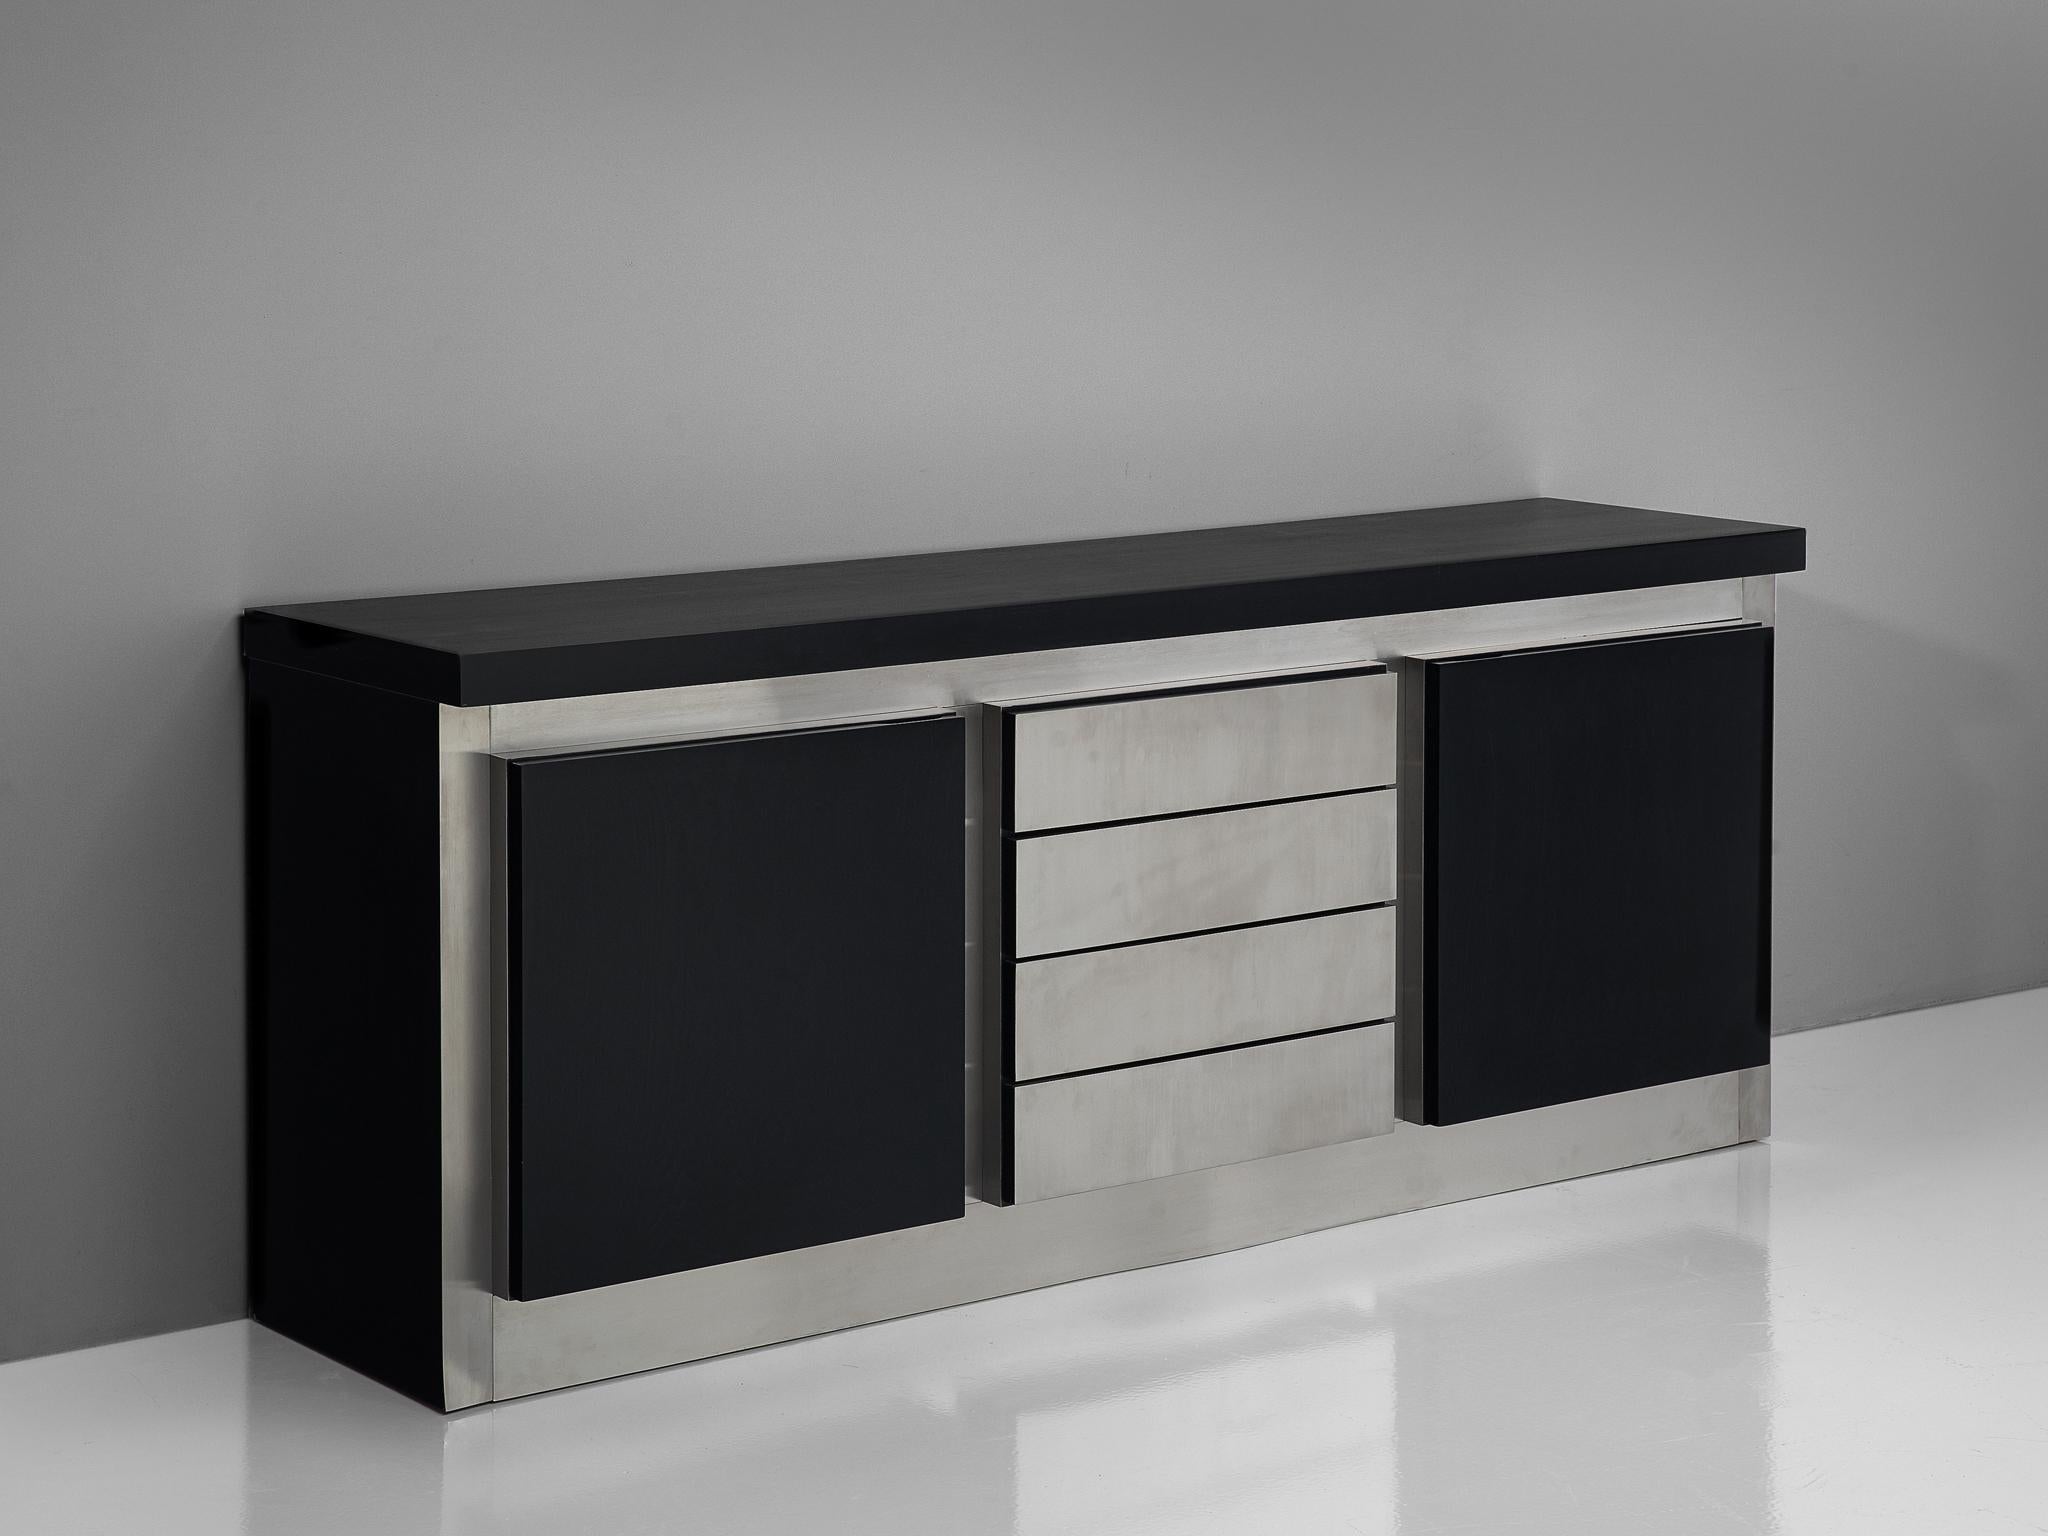 Lodovico Acerbis for Acerbis, credenza, oak and steel, Italy, 1970s

This elegant and modern credenza in stainless steel and stained oak is designed by Ludocivo Acerbis and part of the 'Parioli System'. Within this line of design Acerbis created